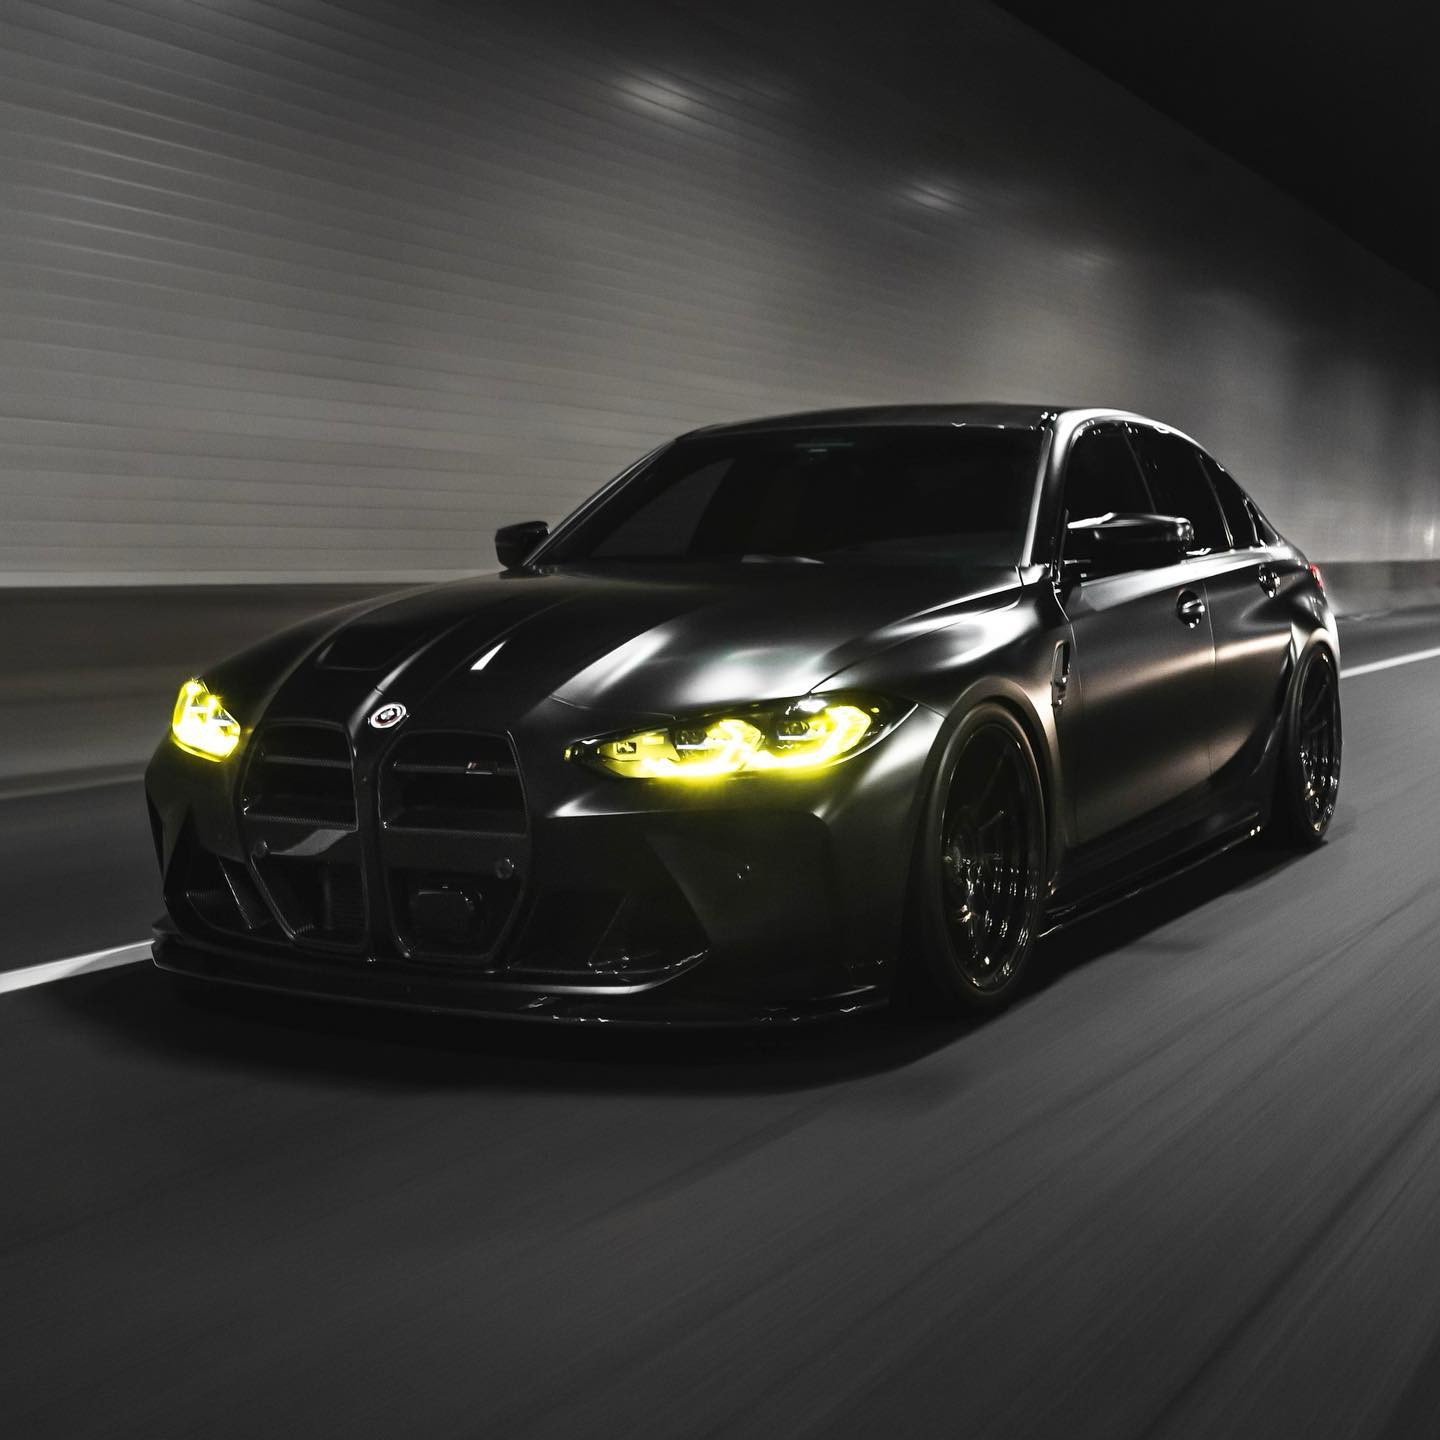 https://s1.cdn.autoevolution.com/images/news/murdered-out-bmw-m3-proves-less-is-more-sports-sedan-is-darker-than-night-itself-207858_1.jpg